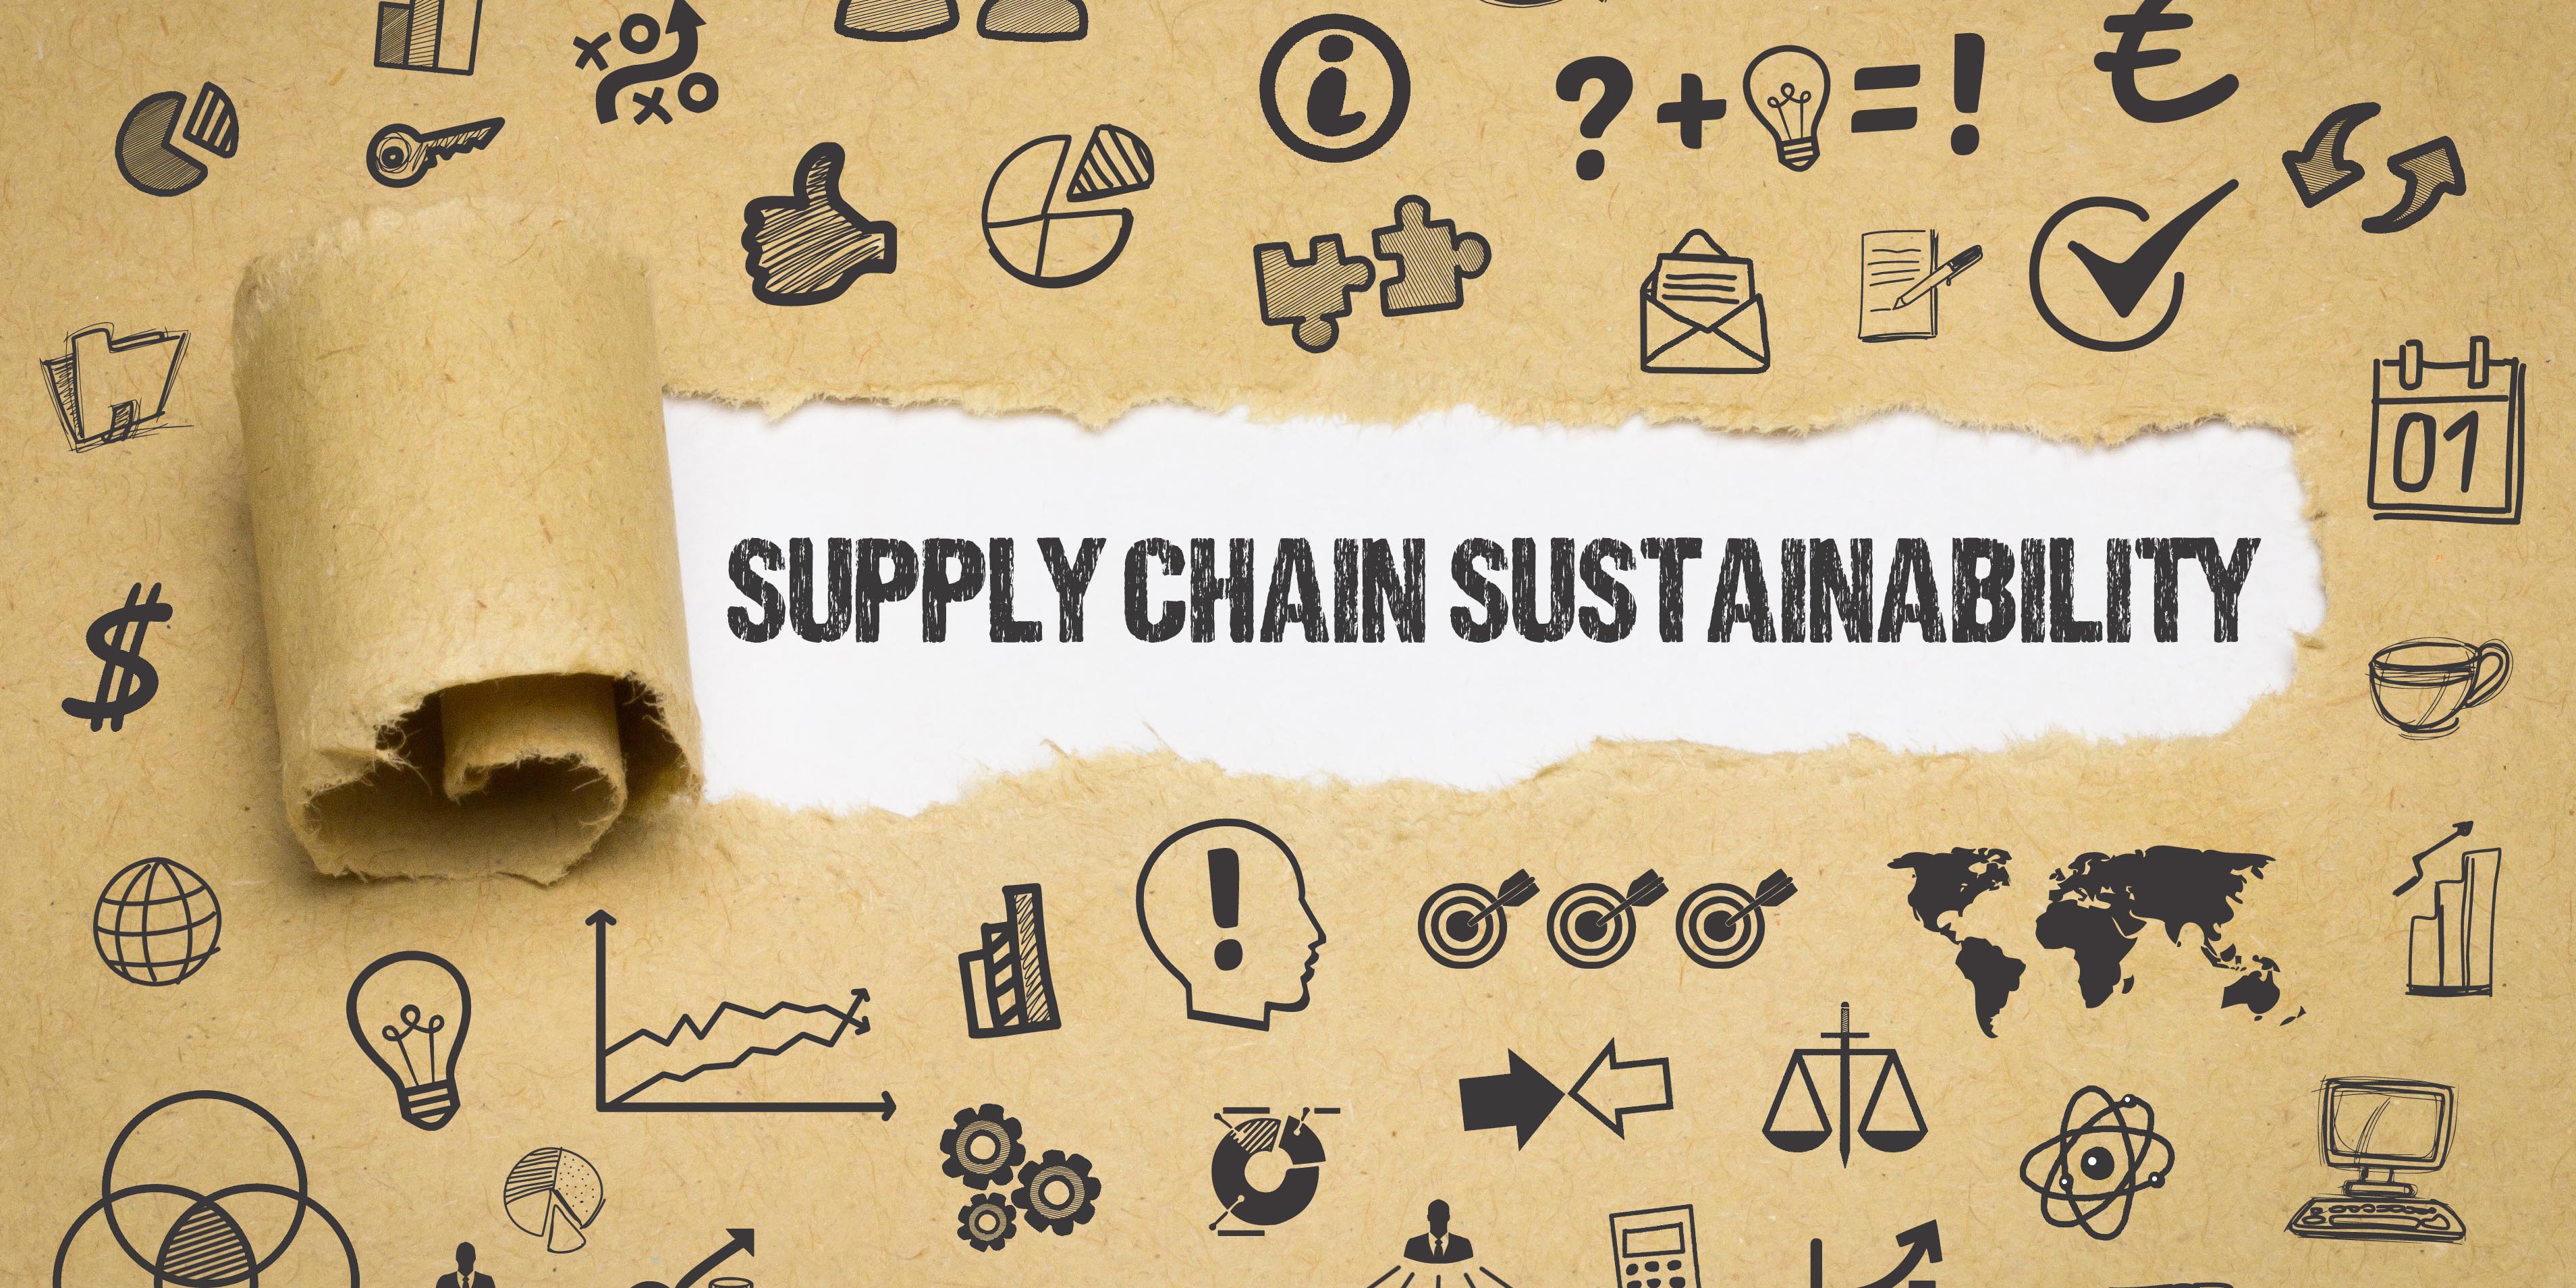 supply chain management and certification for monitoring.